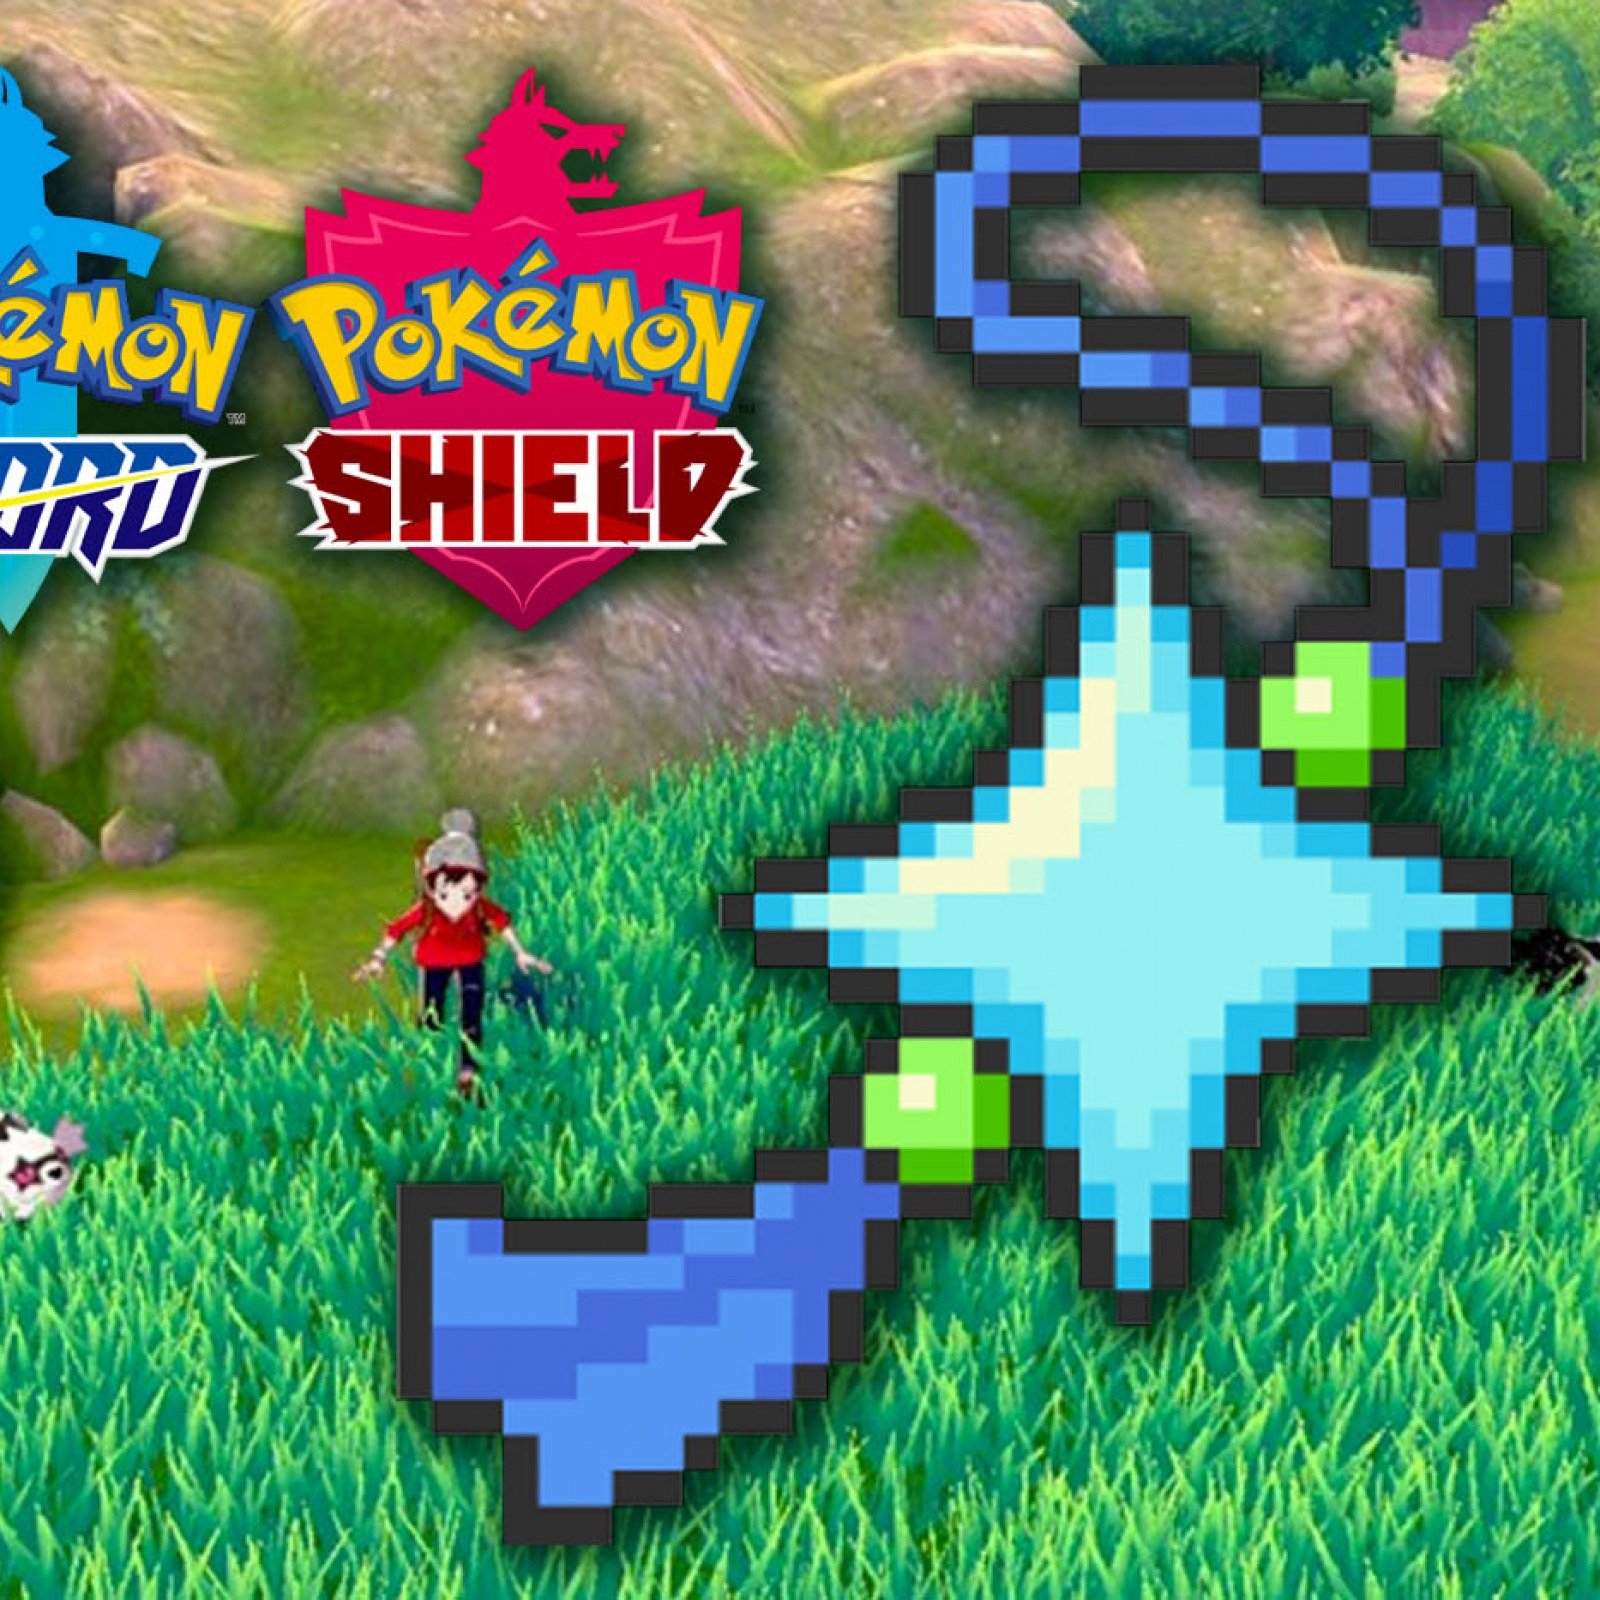 Pokemon Sword And Shield Shiny Hunting Guide How To Find Rare Pokemon